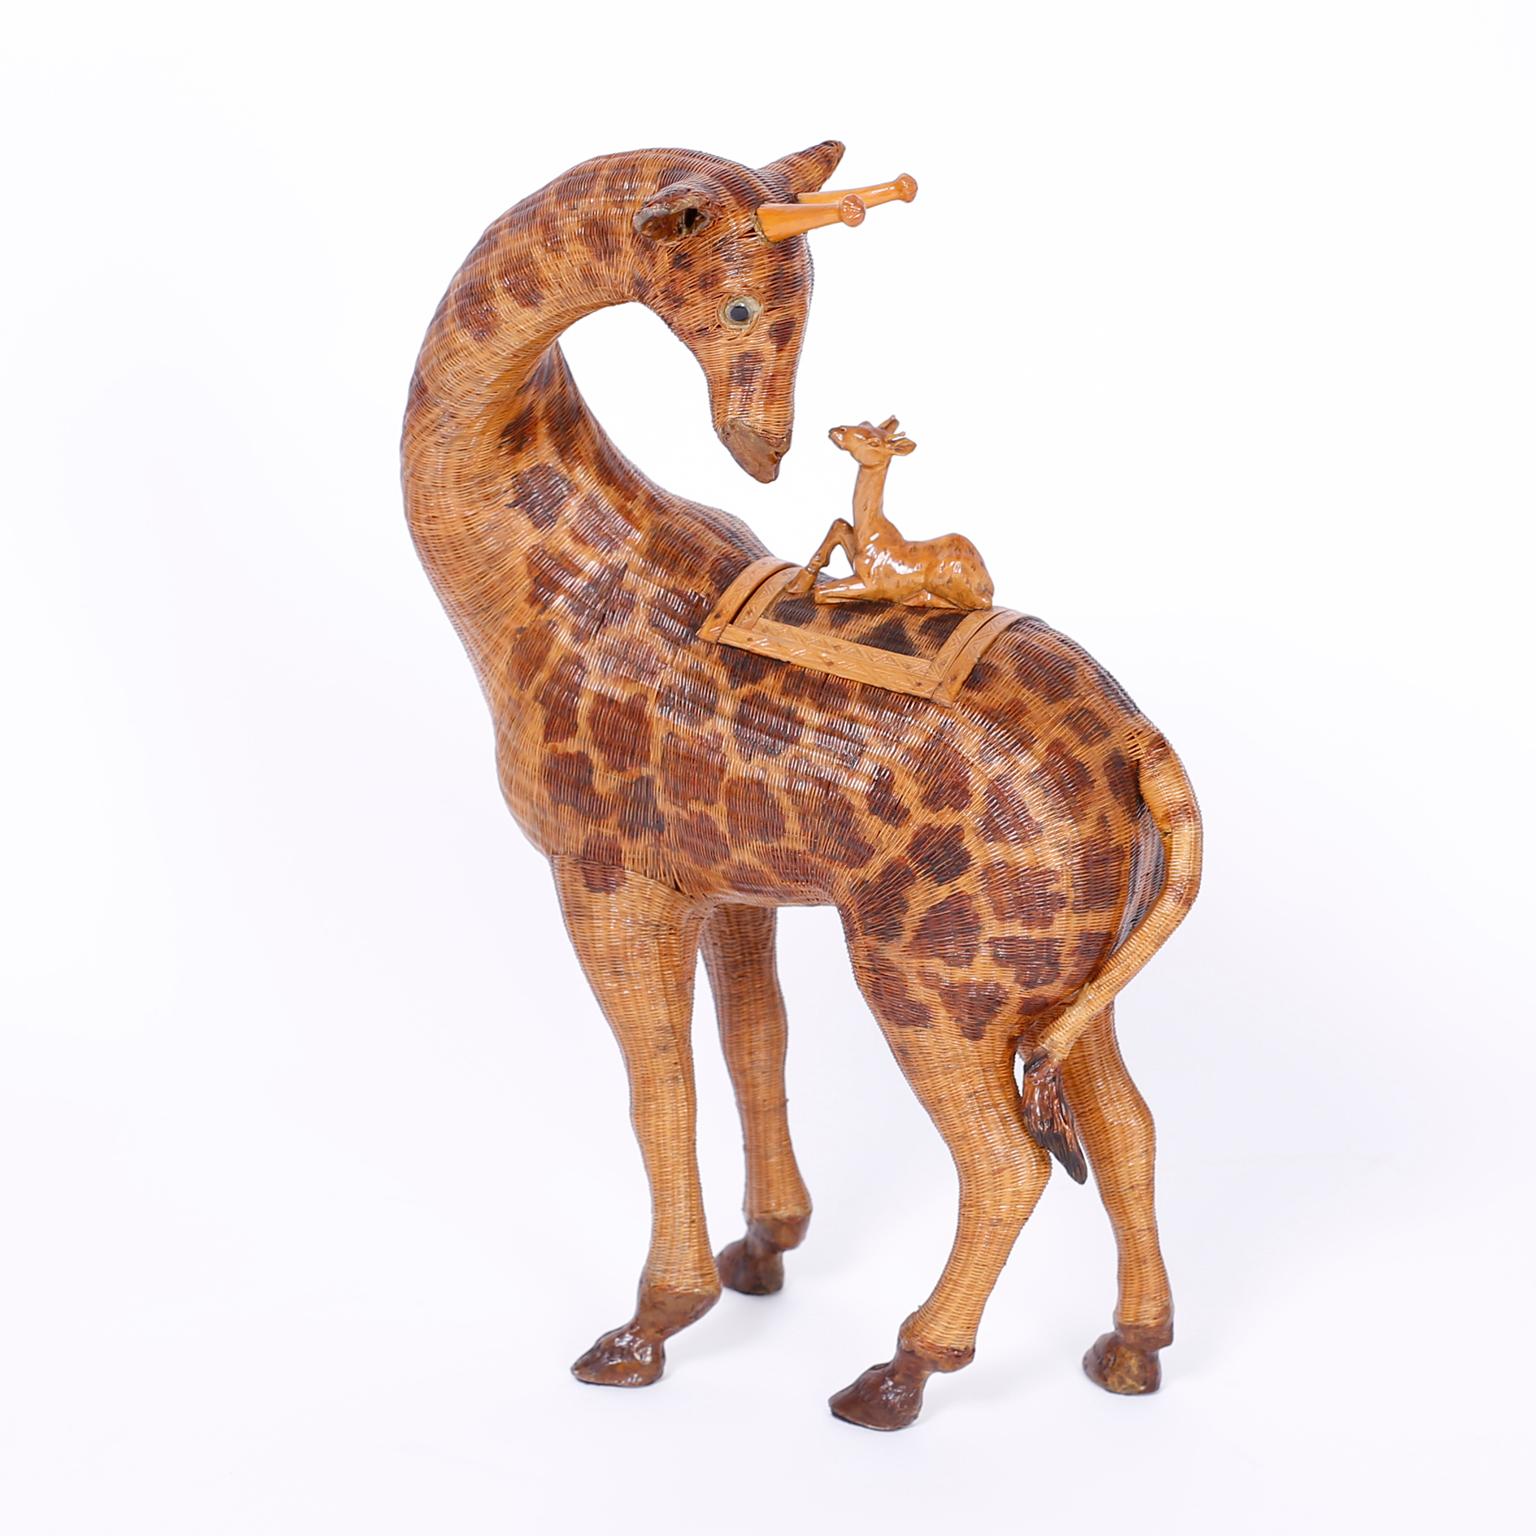 Near pair of wicker giraffes from the famed Shanghai collection with intricate hand woven construction and having carved wood baby giraffe lid handles. 

Measures: From left to right

H 16.5 W 11 D 6.5

H 17 W 10 D 4.5.